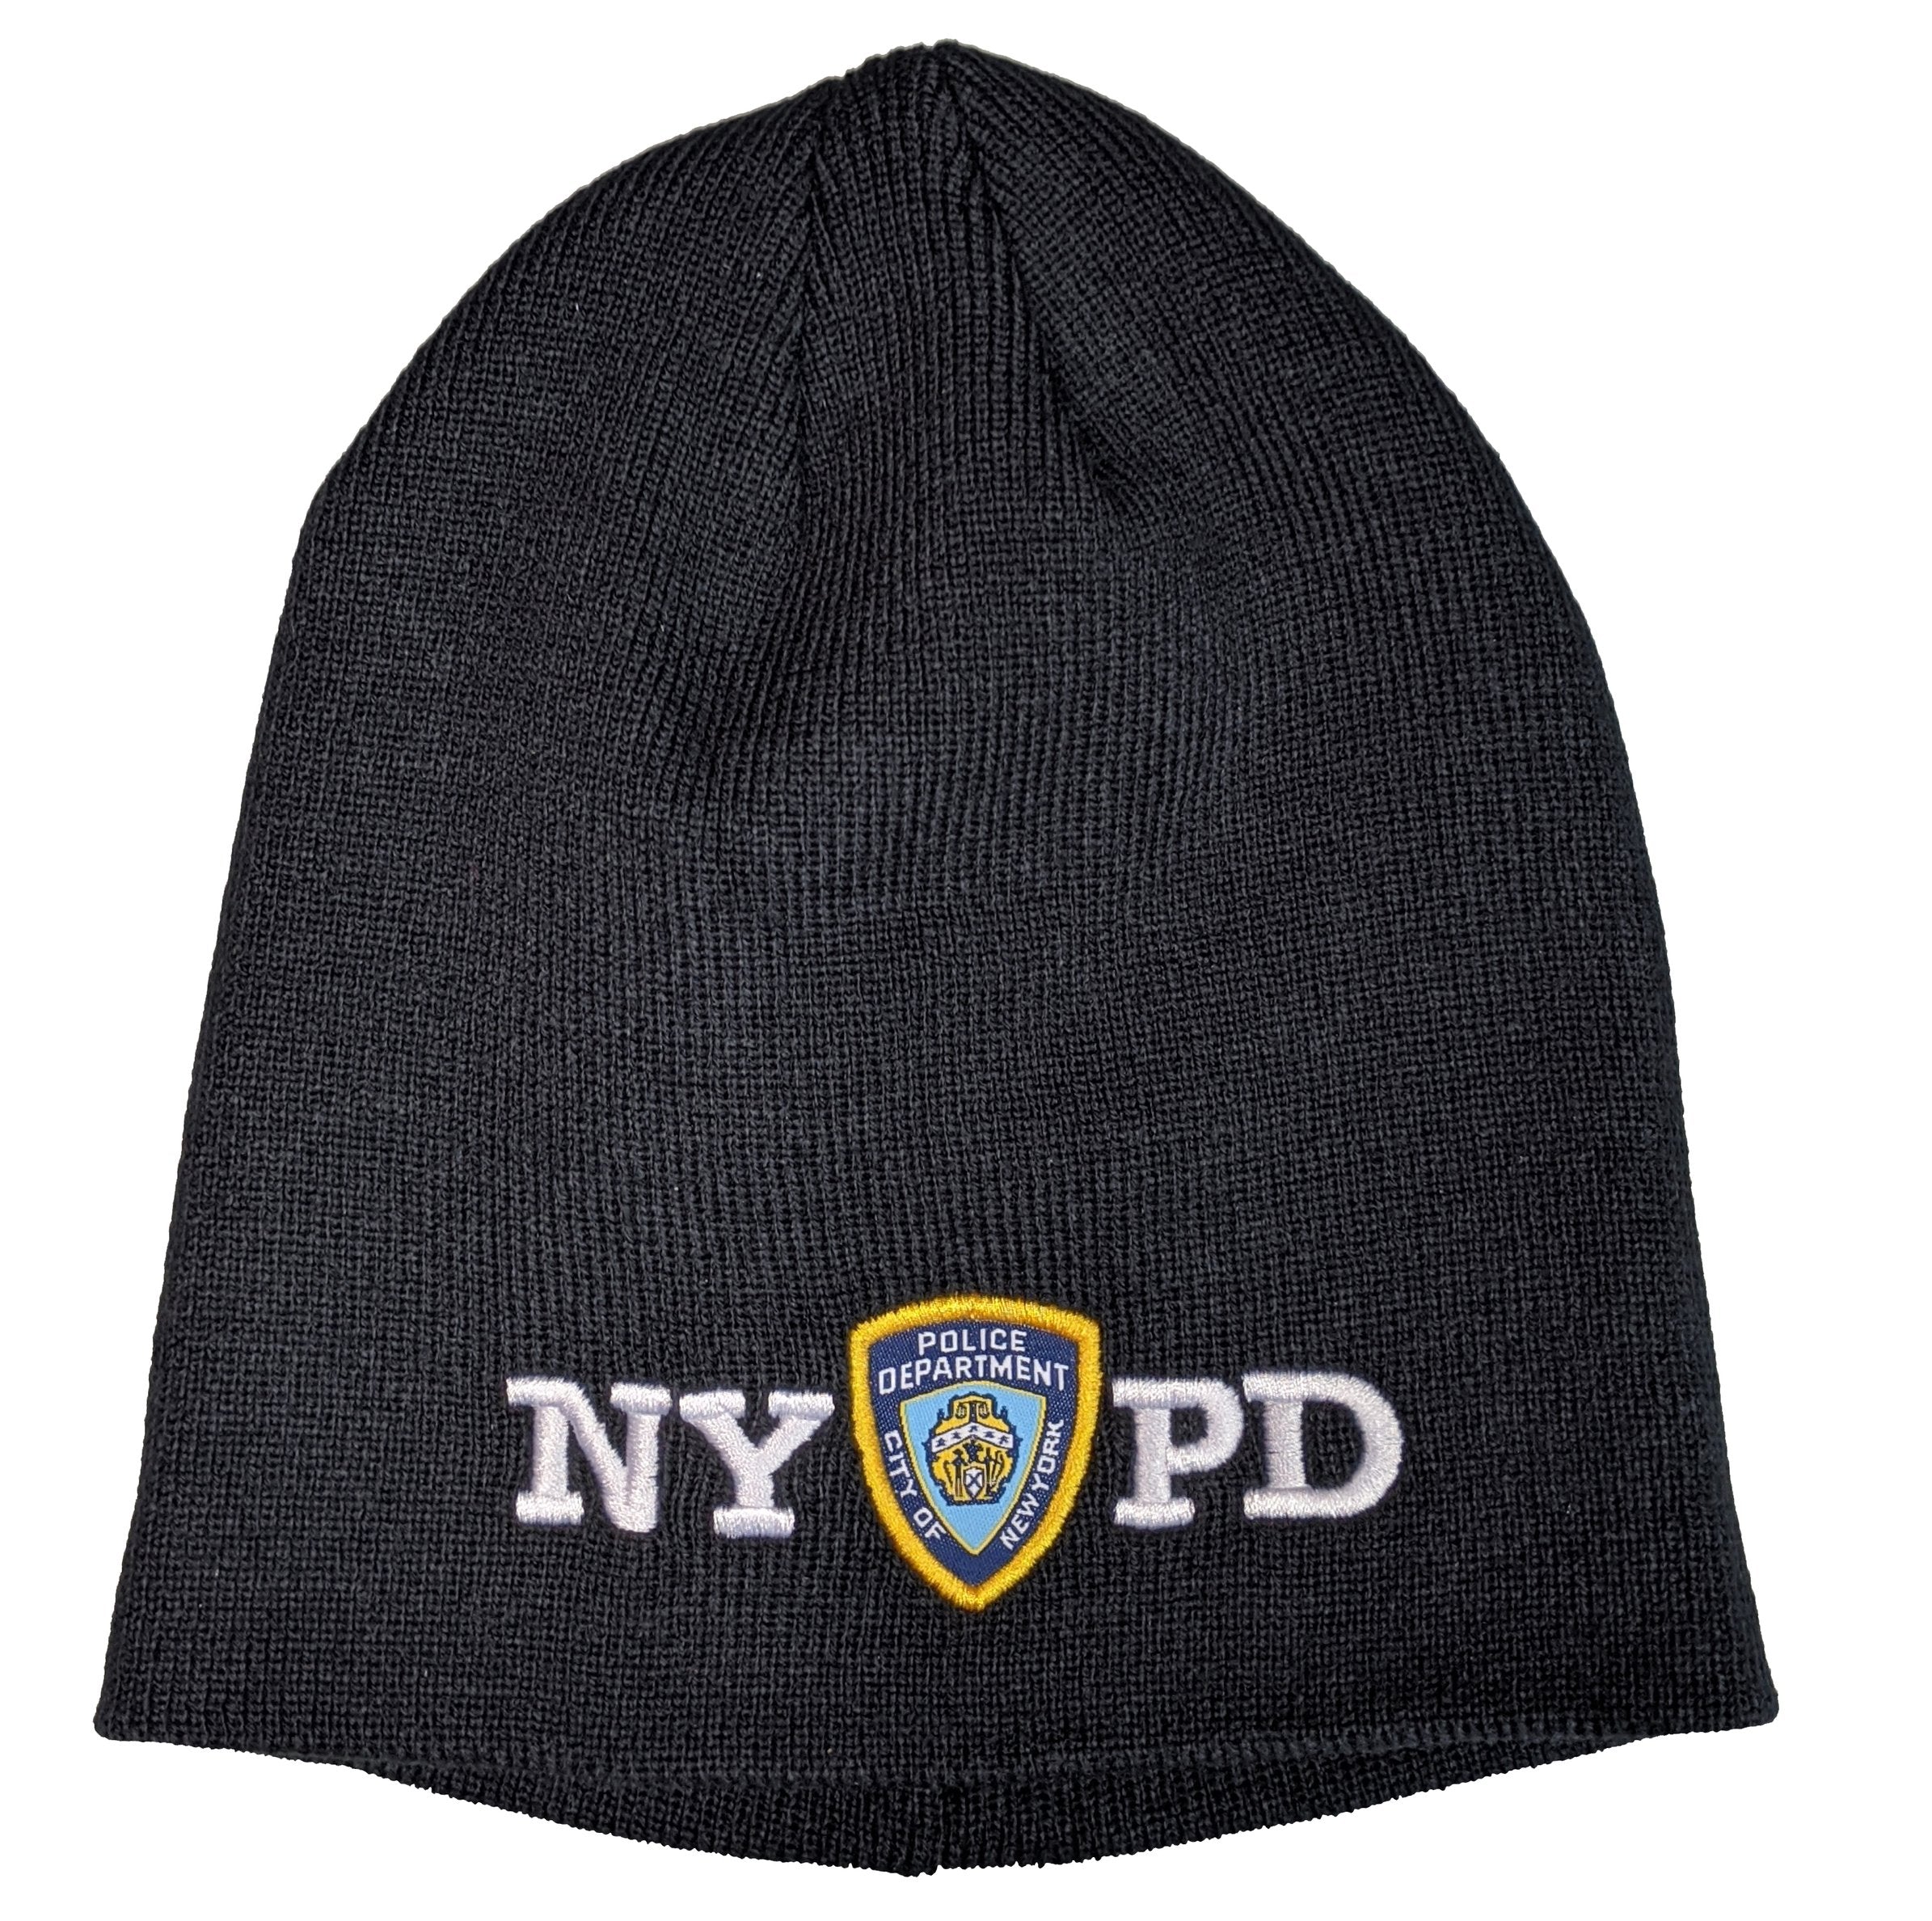 NYPD No Fold Winter Hat Beanie Skull Cap Officially Licensed Navy Blue